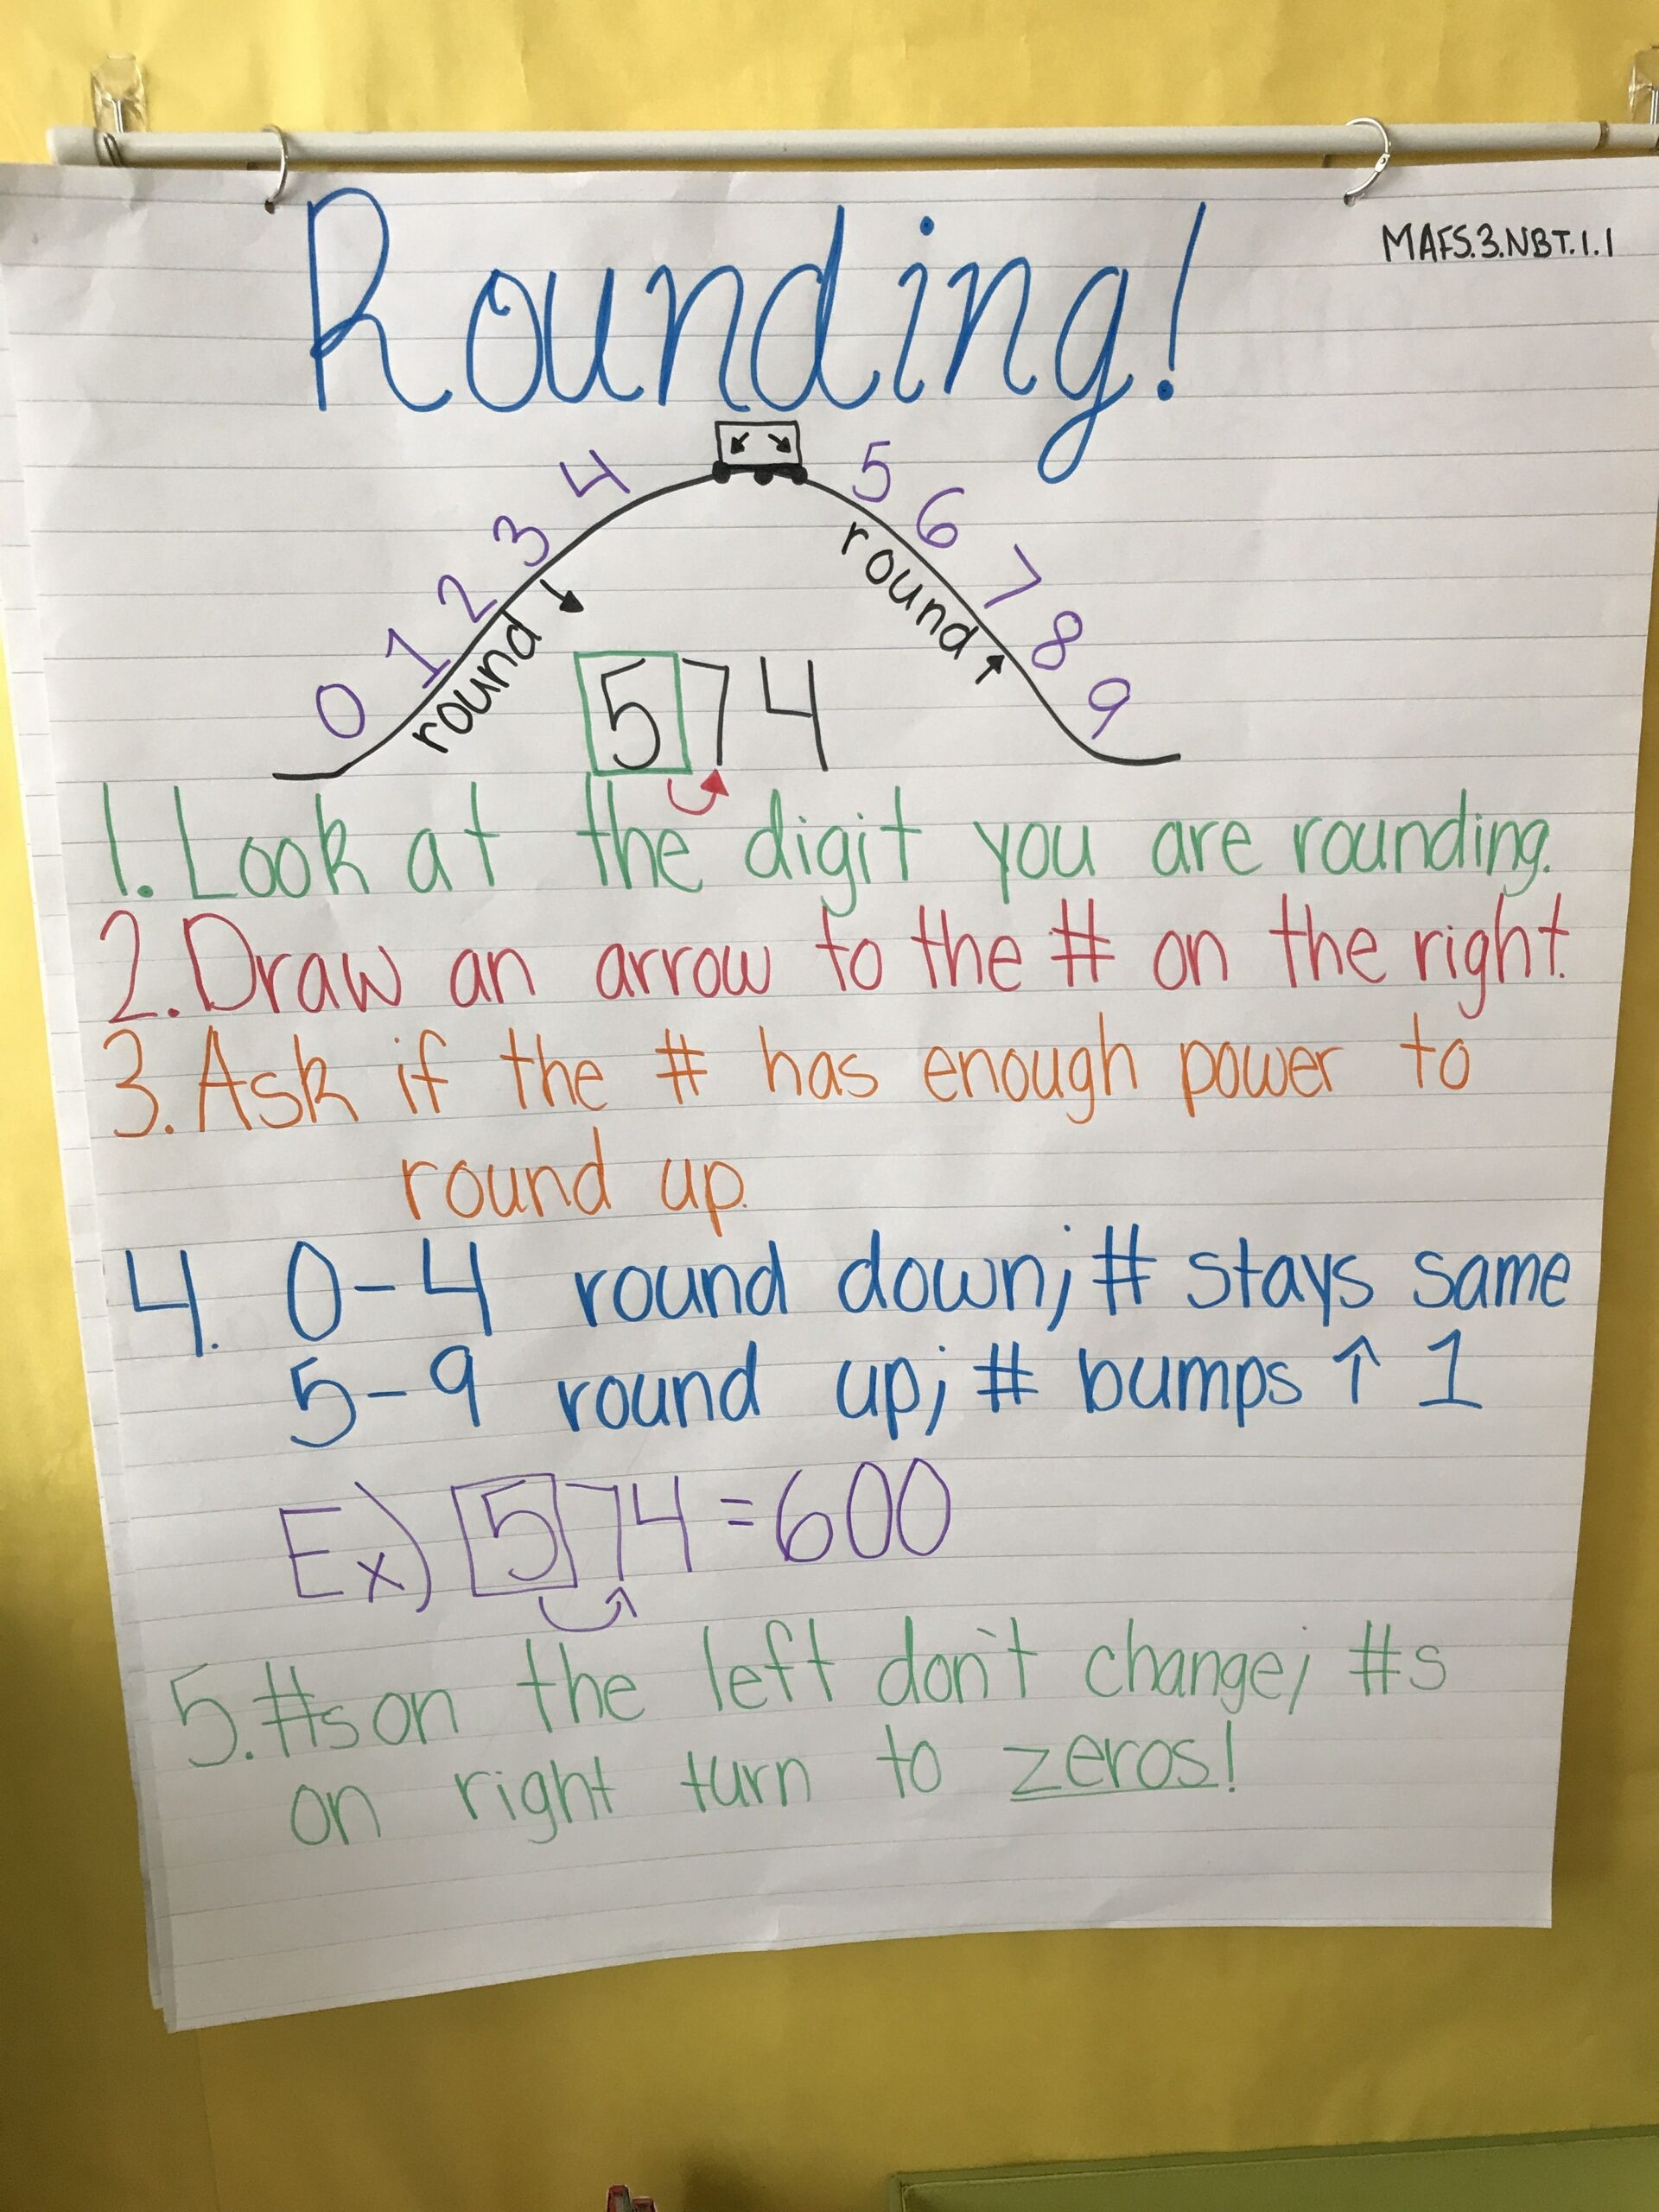 Rounding Roller Coaster Anchor Chart With Rules To Follow Anchor Charts Math School Fun